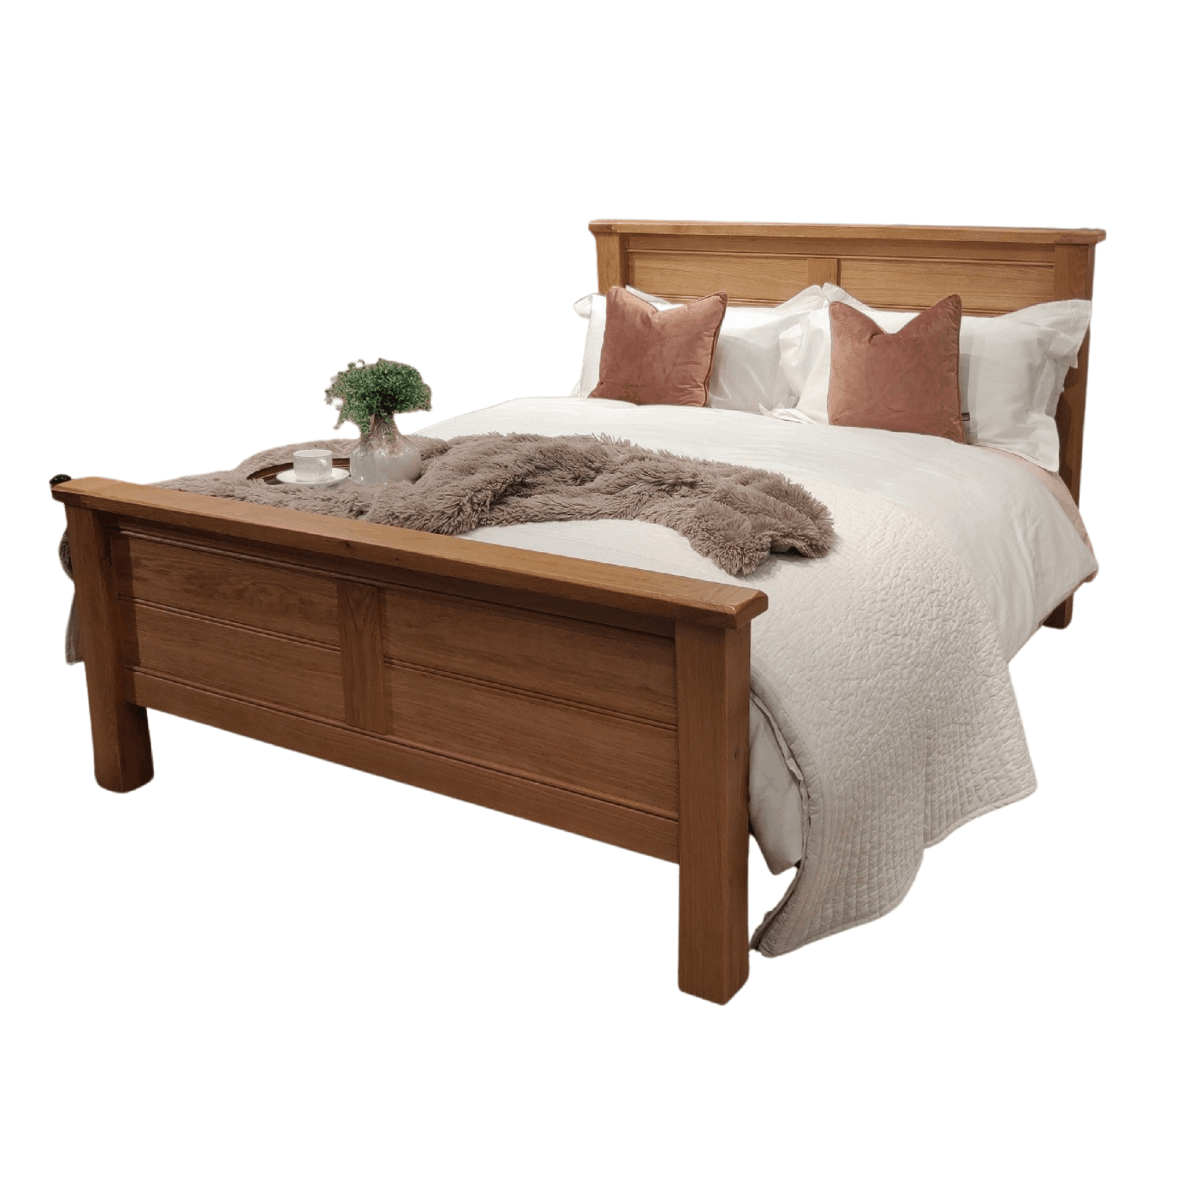 Blake Double Bed Frame 4ft6